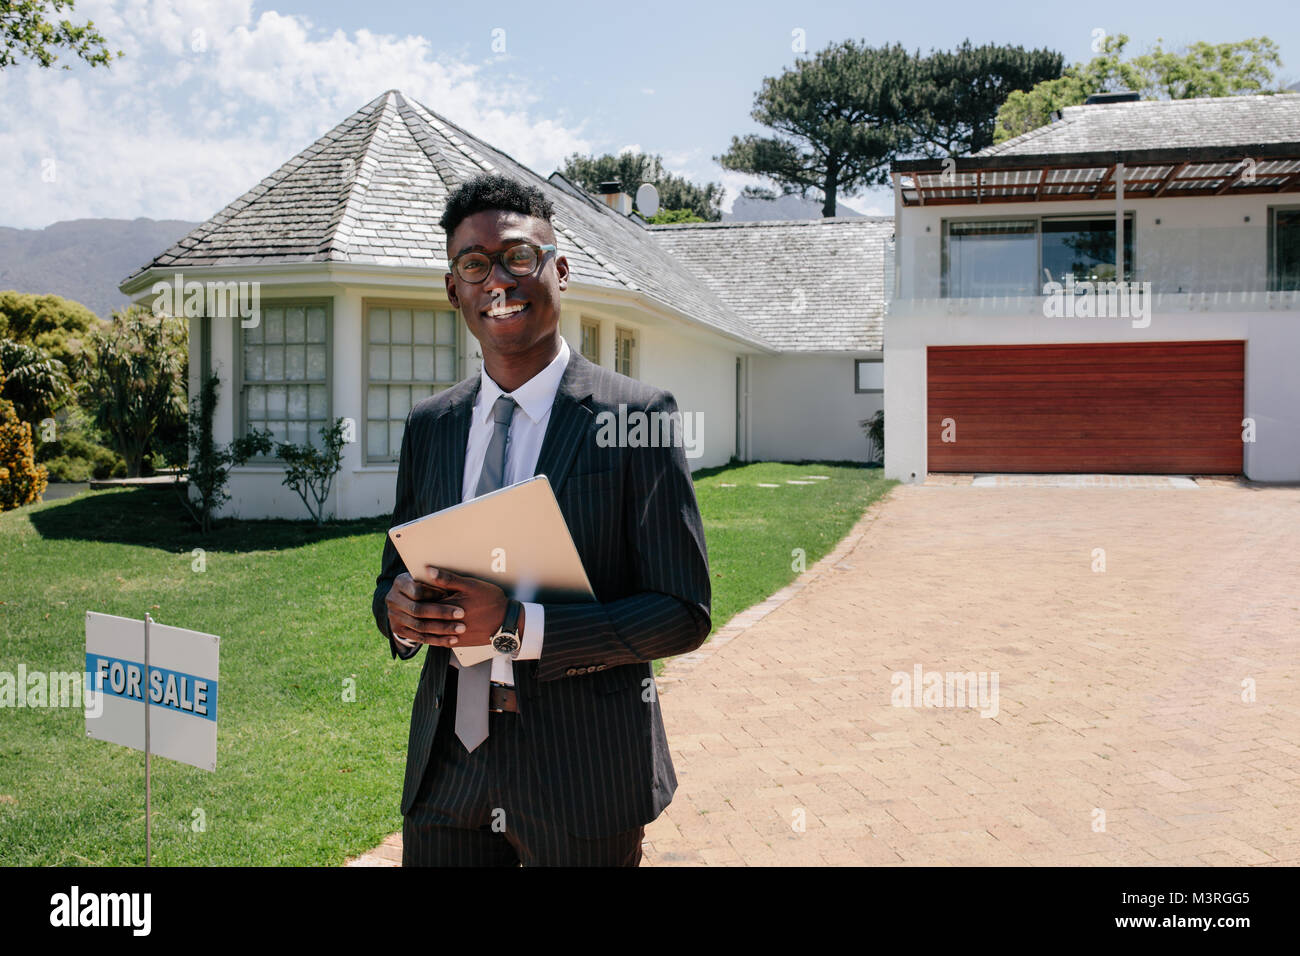 Portrait of confident young african male real estate agent standing outside a house for sale. Realtor with digital tablet waiting for visitors. Stock Photo